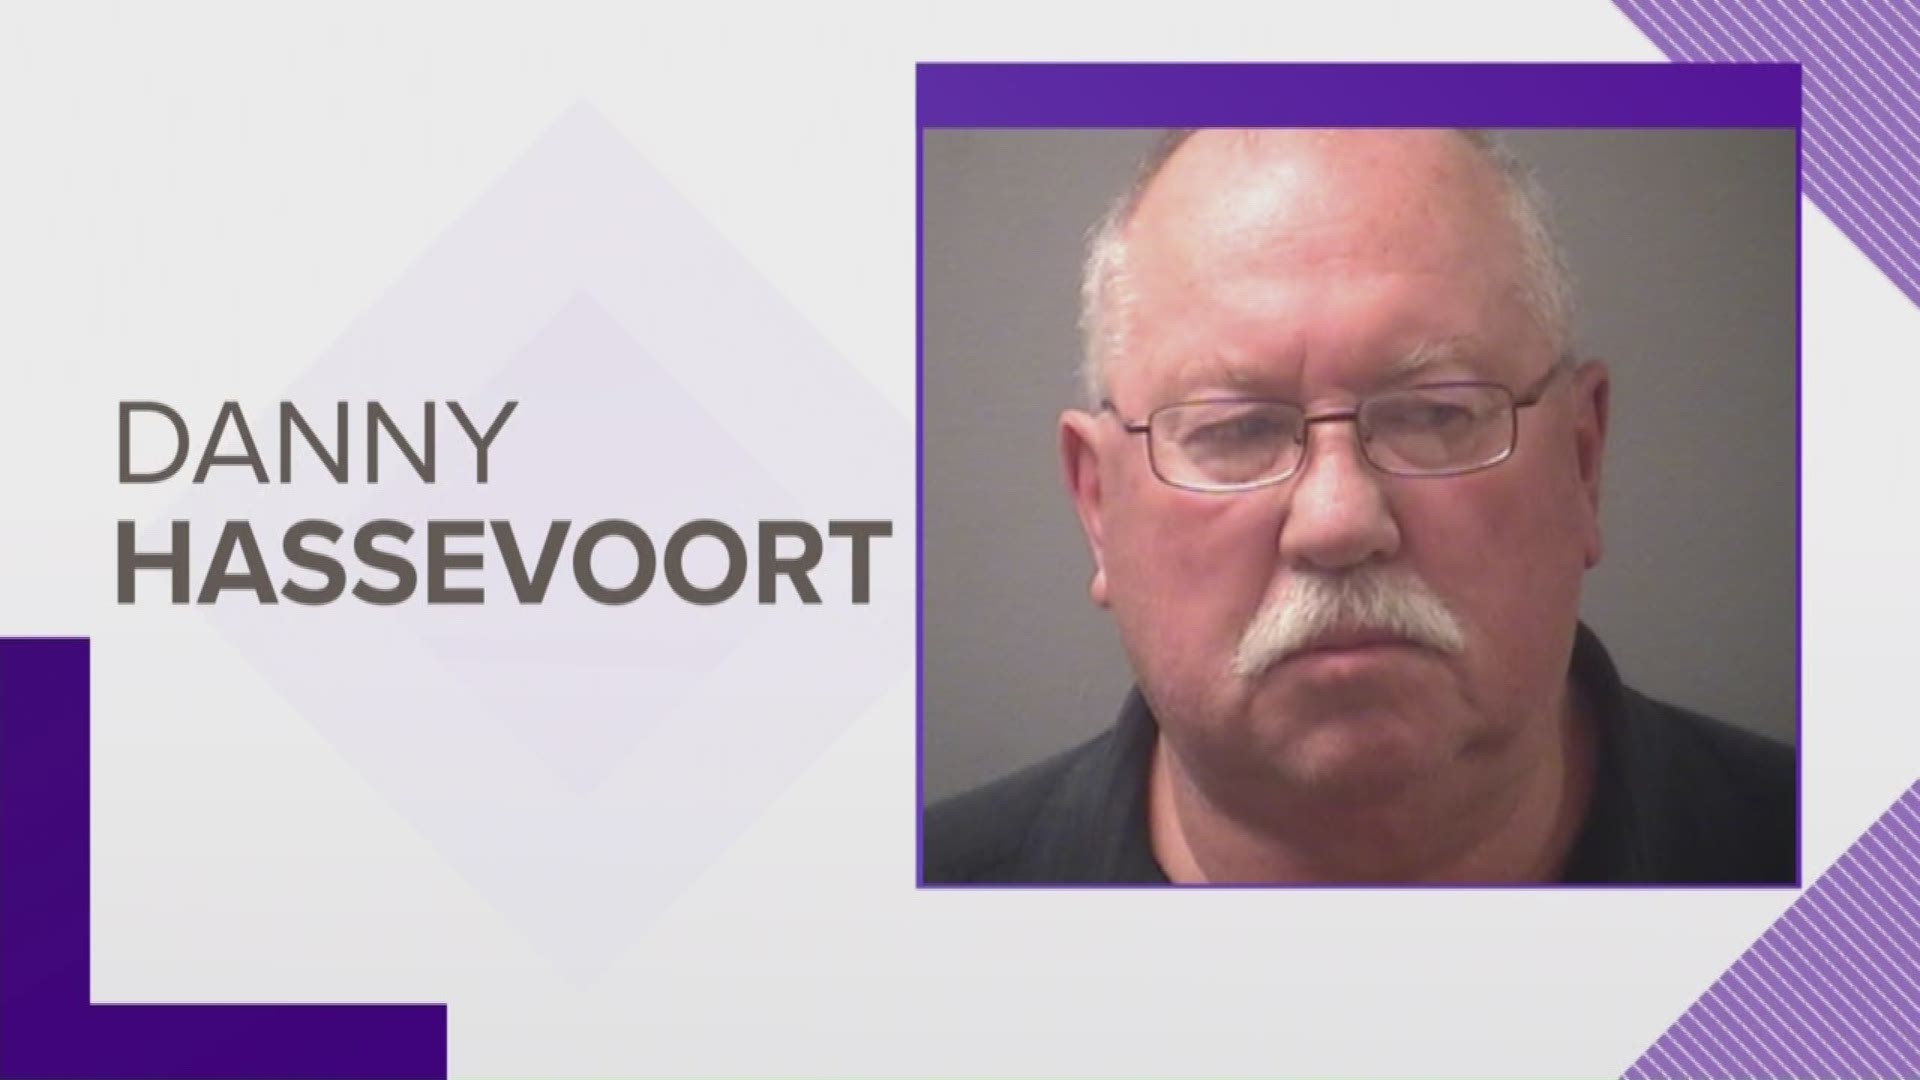 Oceana County man accused of pointing gun at pizza delivery driver